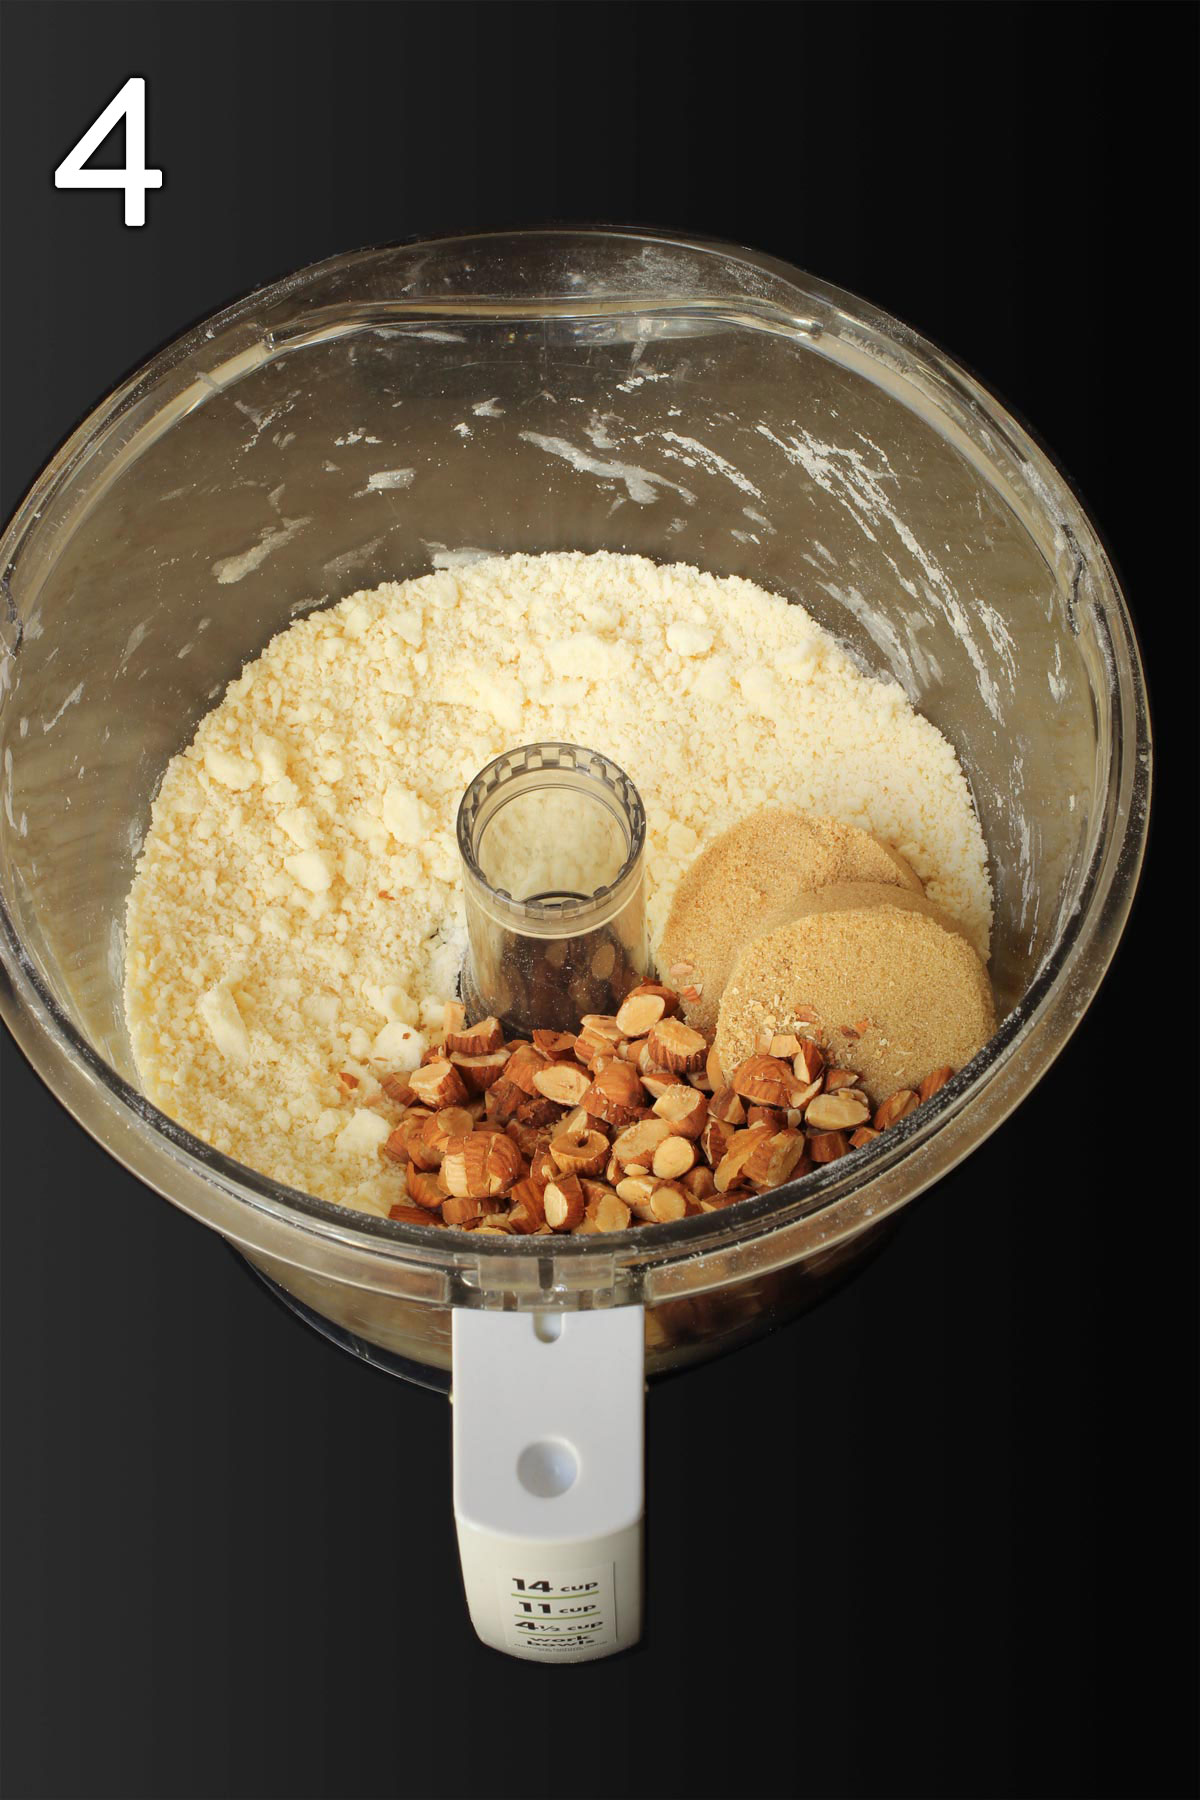 flour, butter, nuts and brown sugar in food processor.